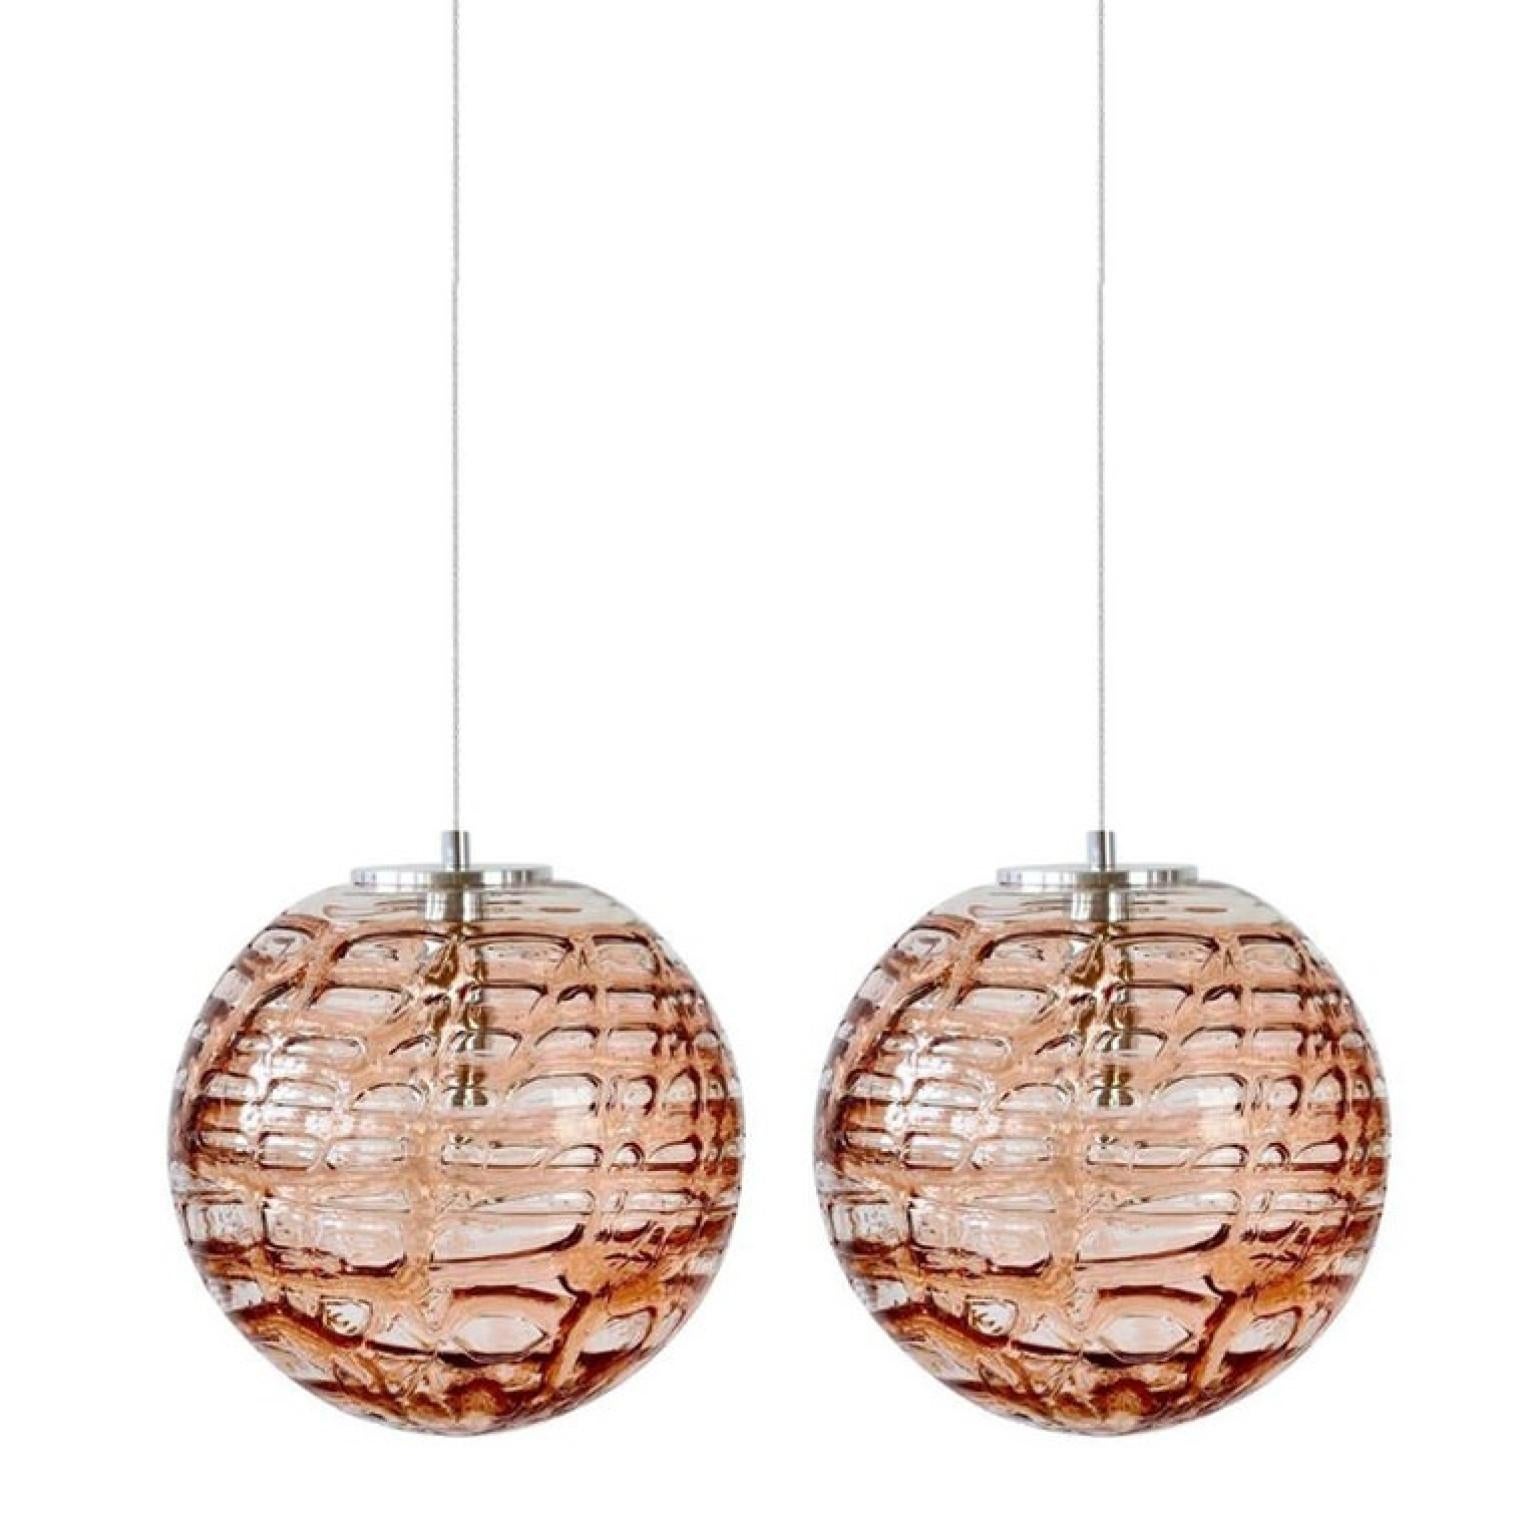 Exceptional Pair of Pink Murano Glass Pendant Lights Venini Style, 1960 For Sale 1